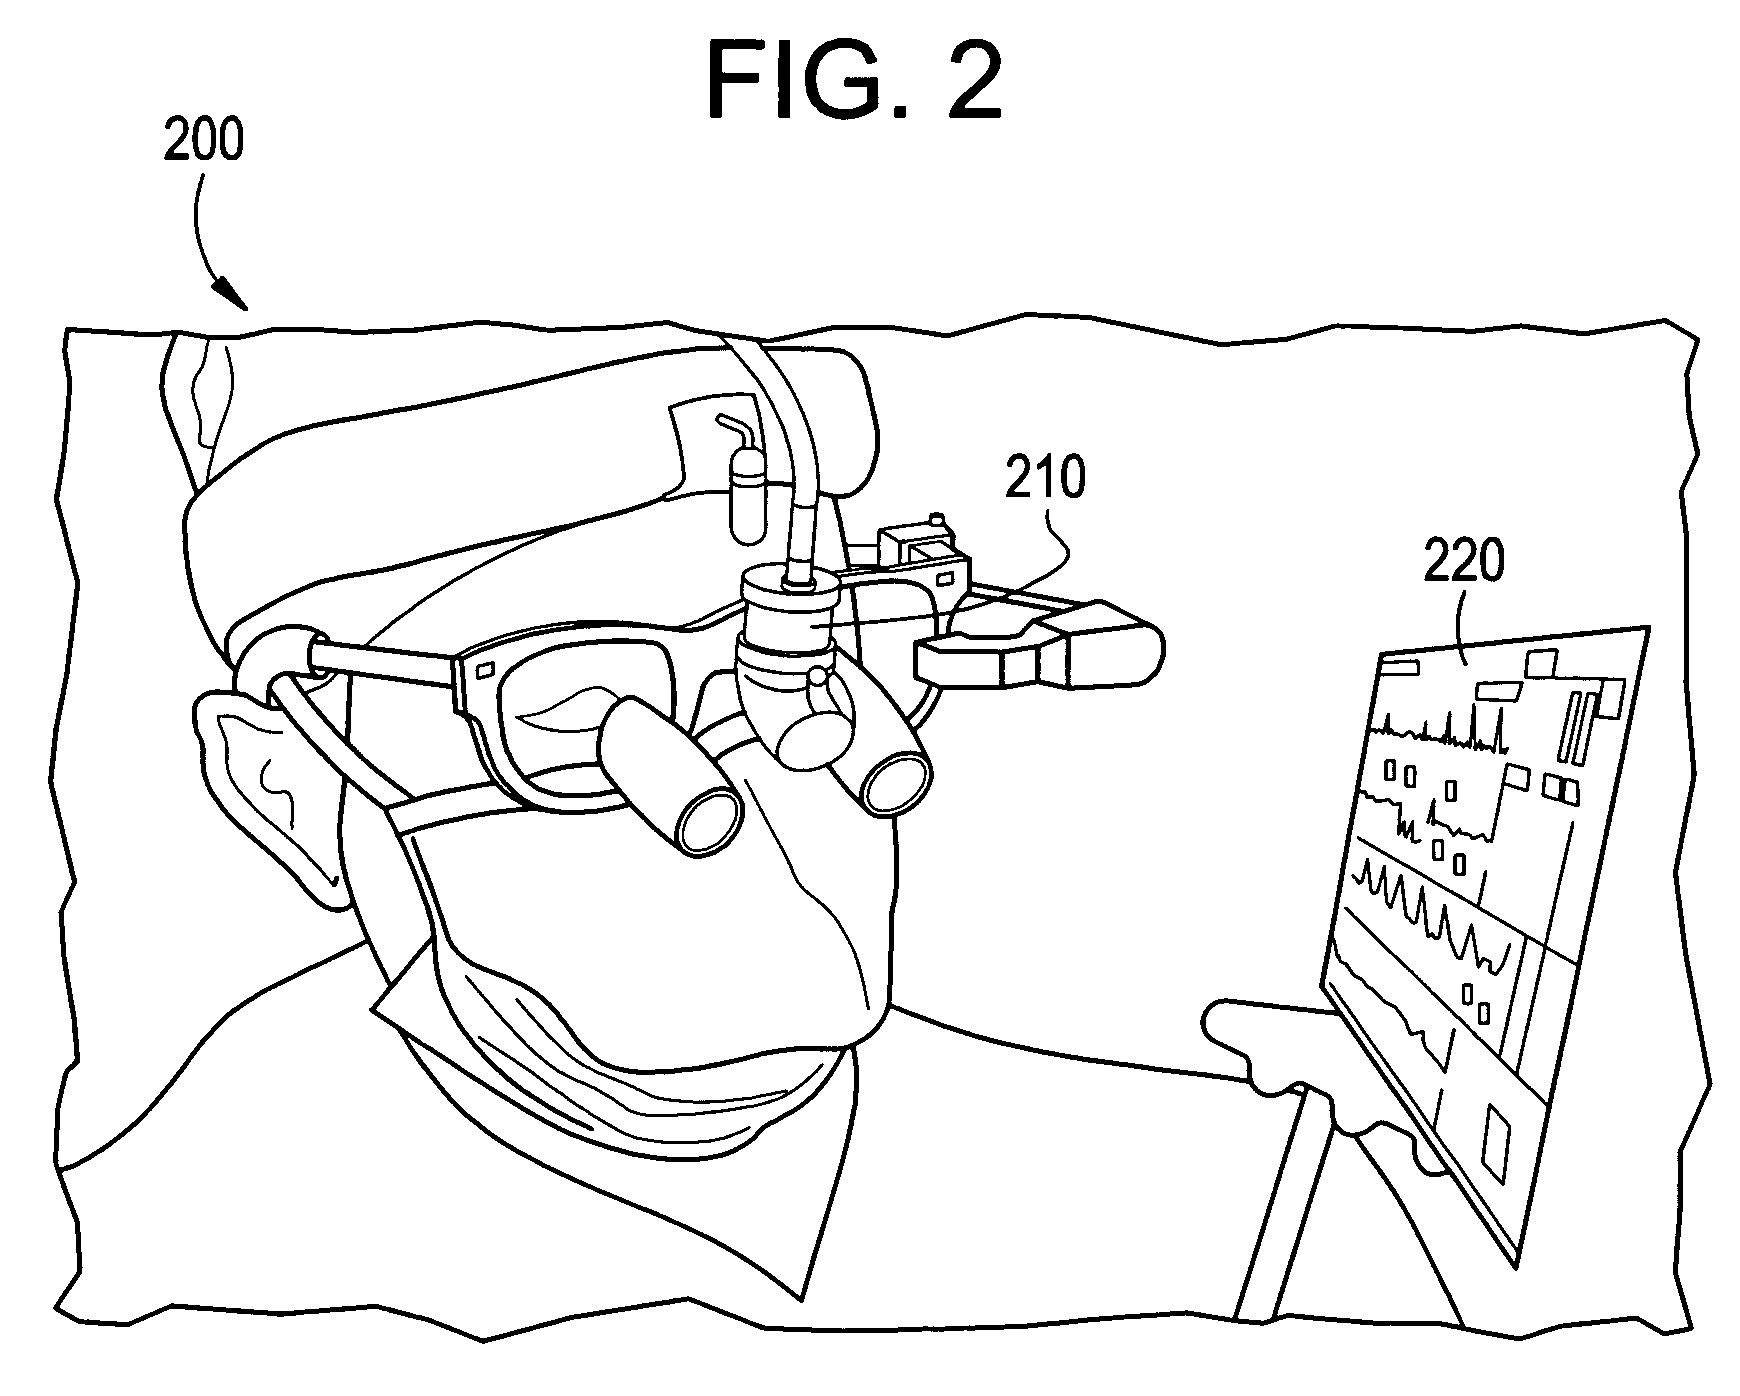 System and method for presentation of enterprise, clinical, and decision support information utilizing eye tracking navigation